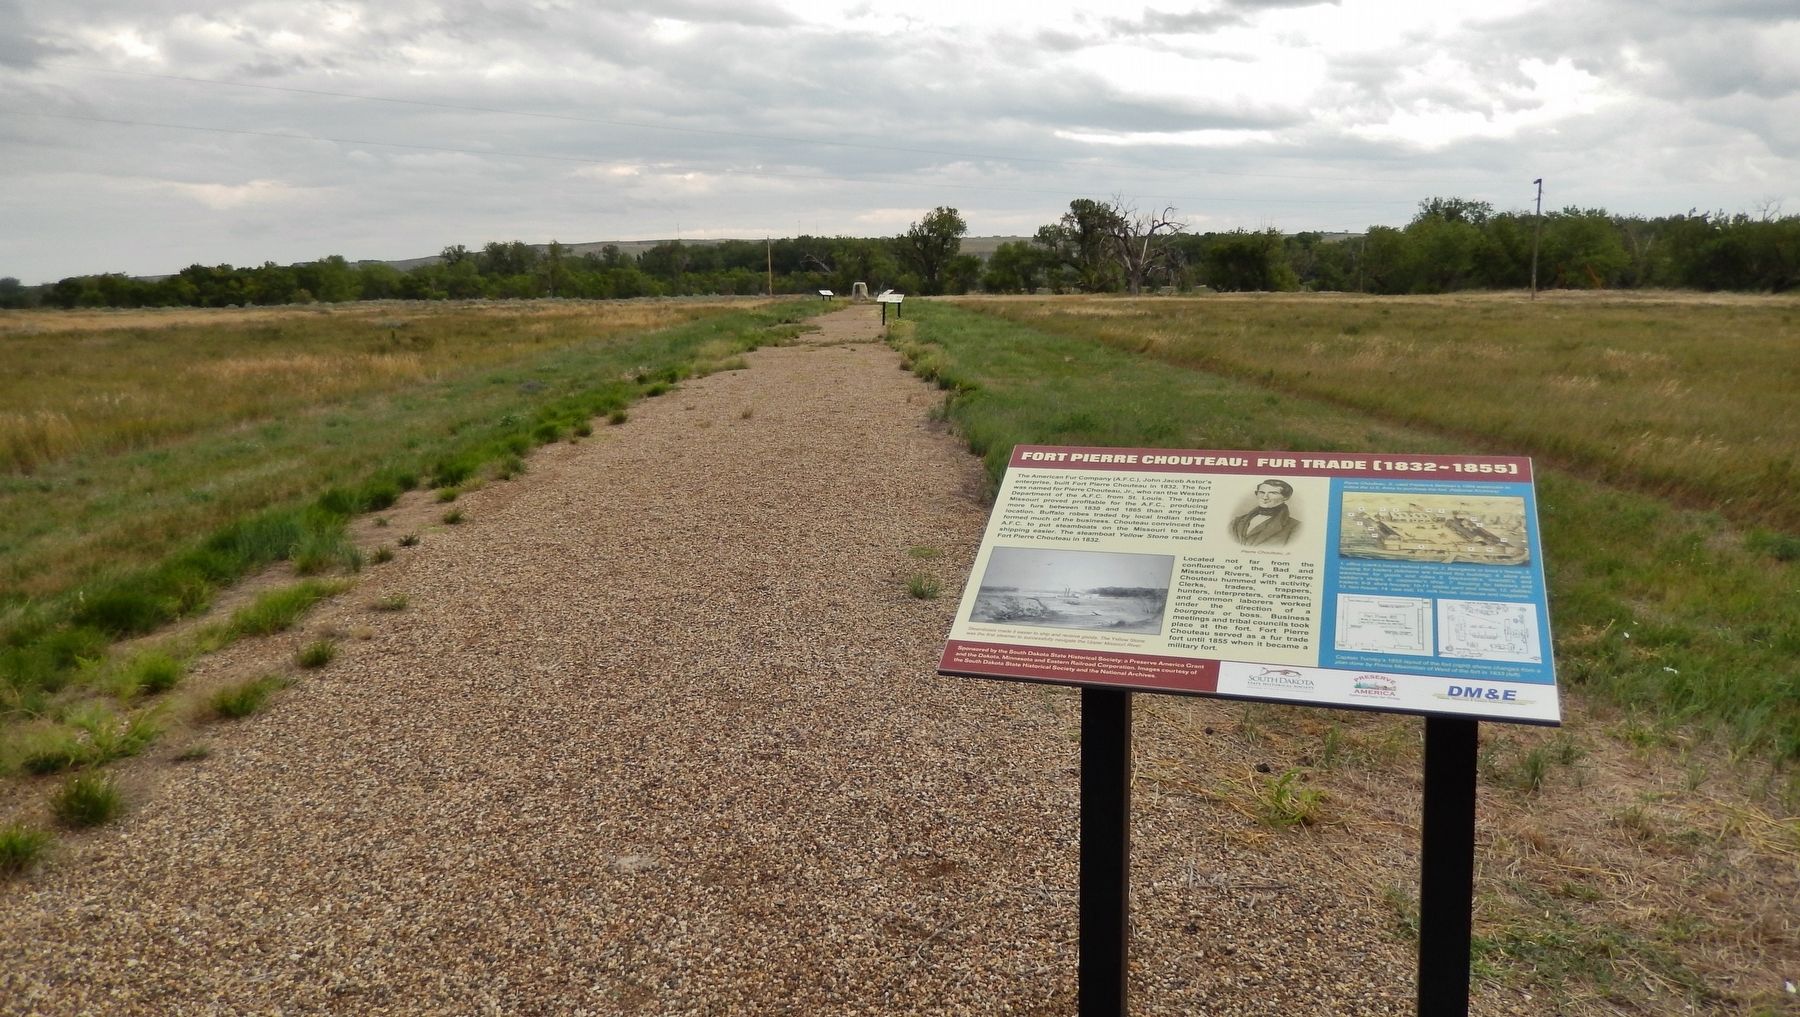 Fort Pierre Chouteau: Fur Trade (1832-1855) Marker (<i>wide view</i>) image. Click for full size.